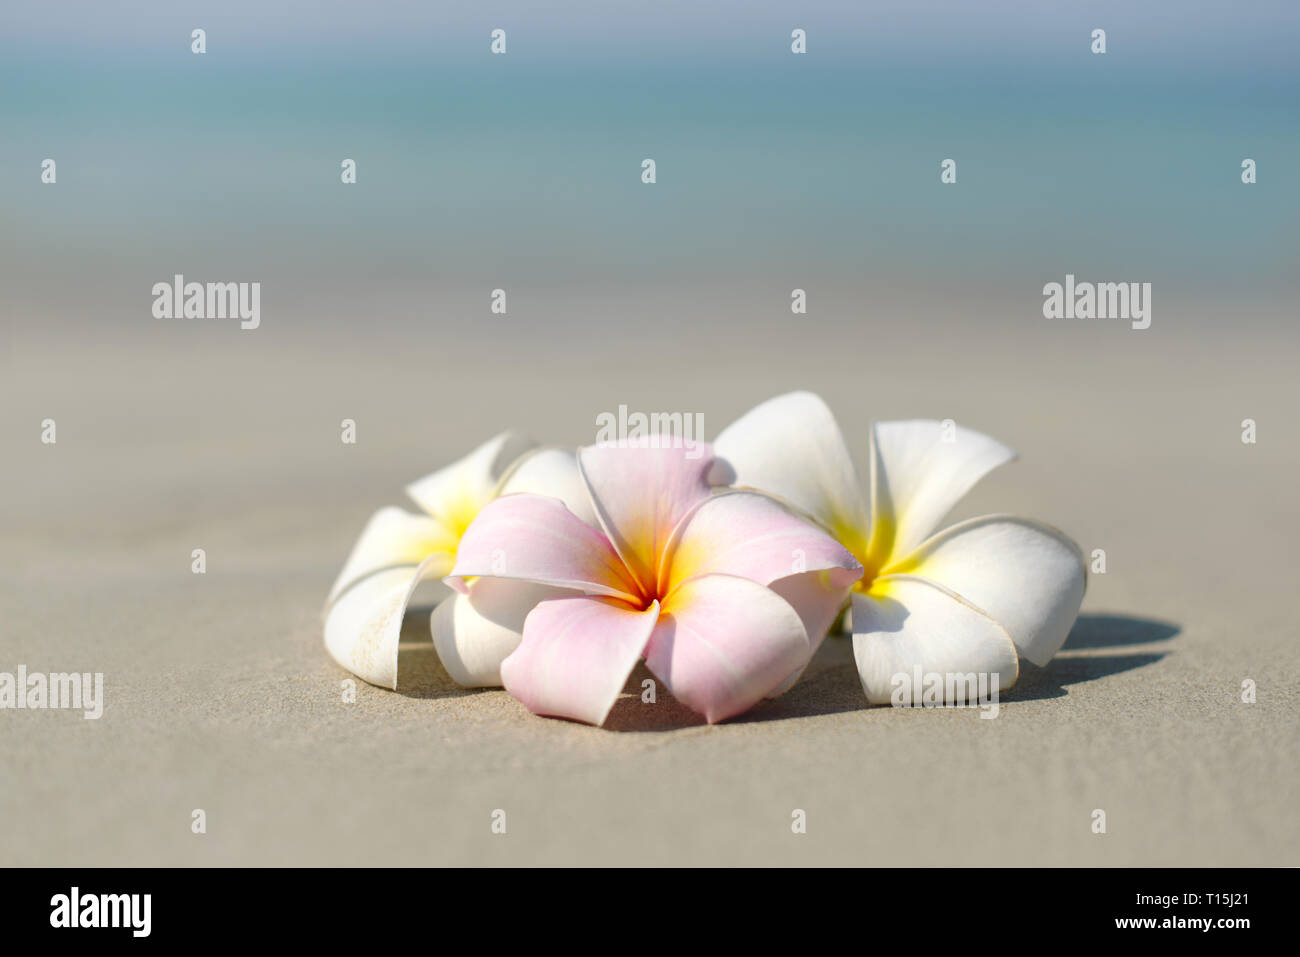 White and pink plumeria frangipani flowers on sandy beach in front of sea coast. Tropical exotic view. Travel vacation concept. Free copy space. Stock Photo